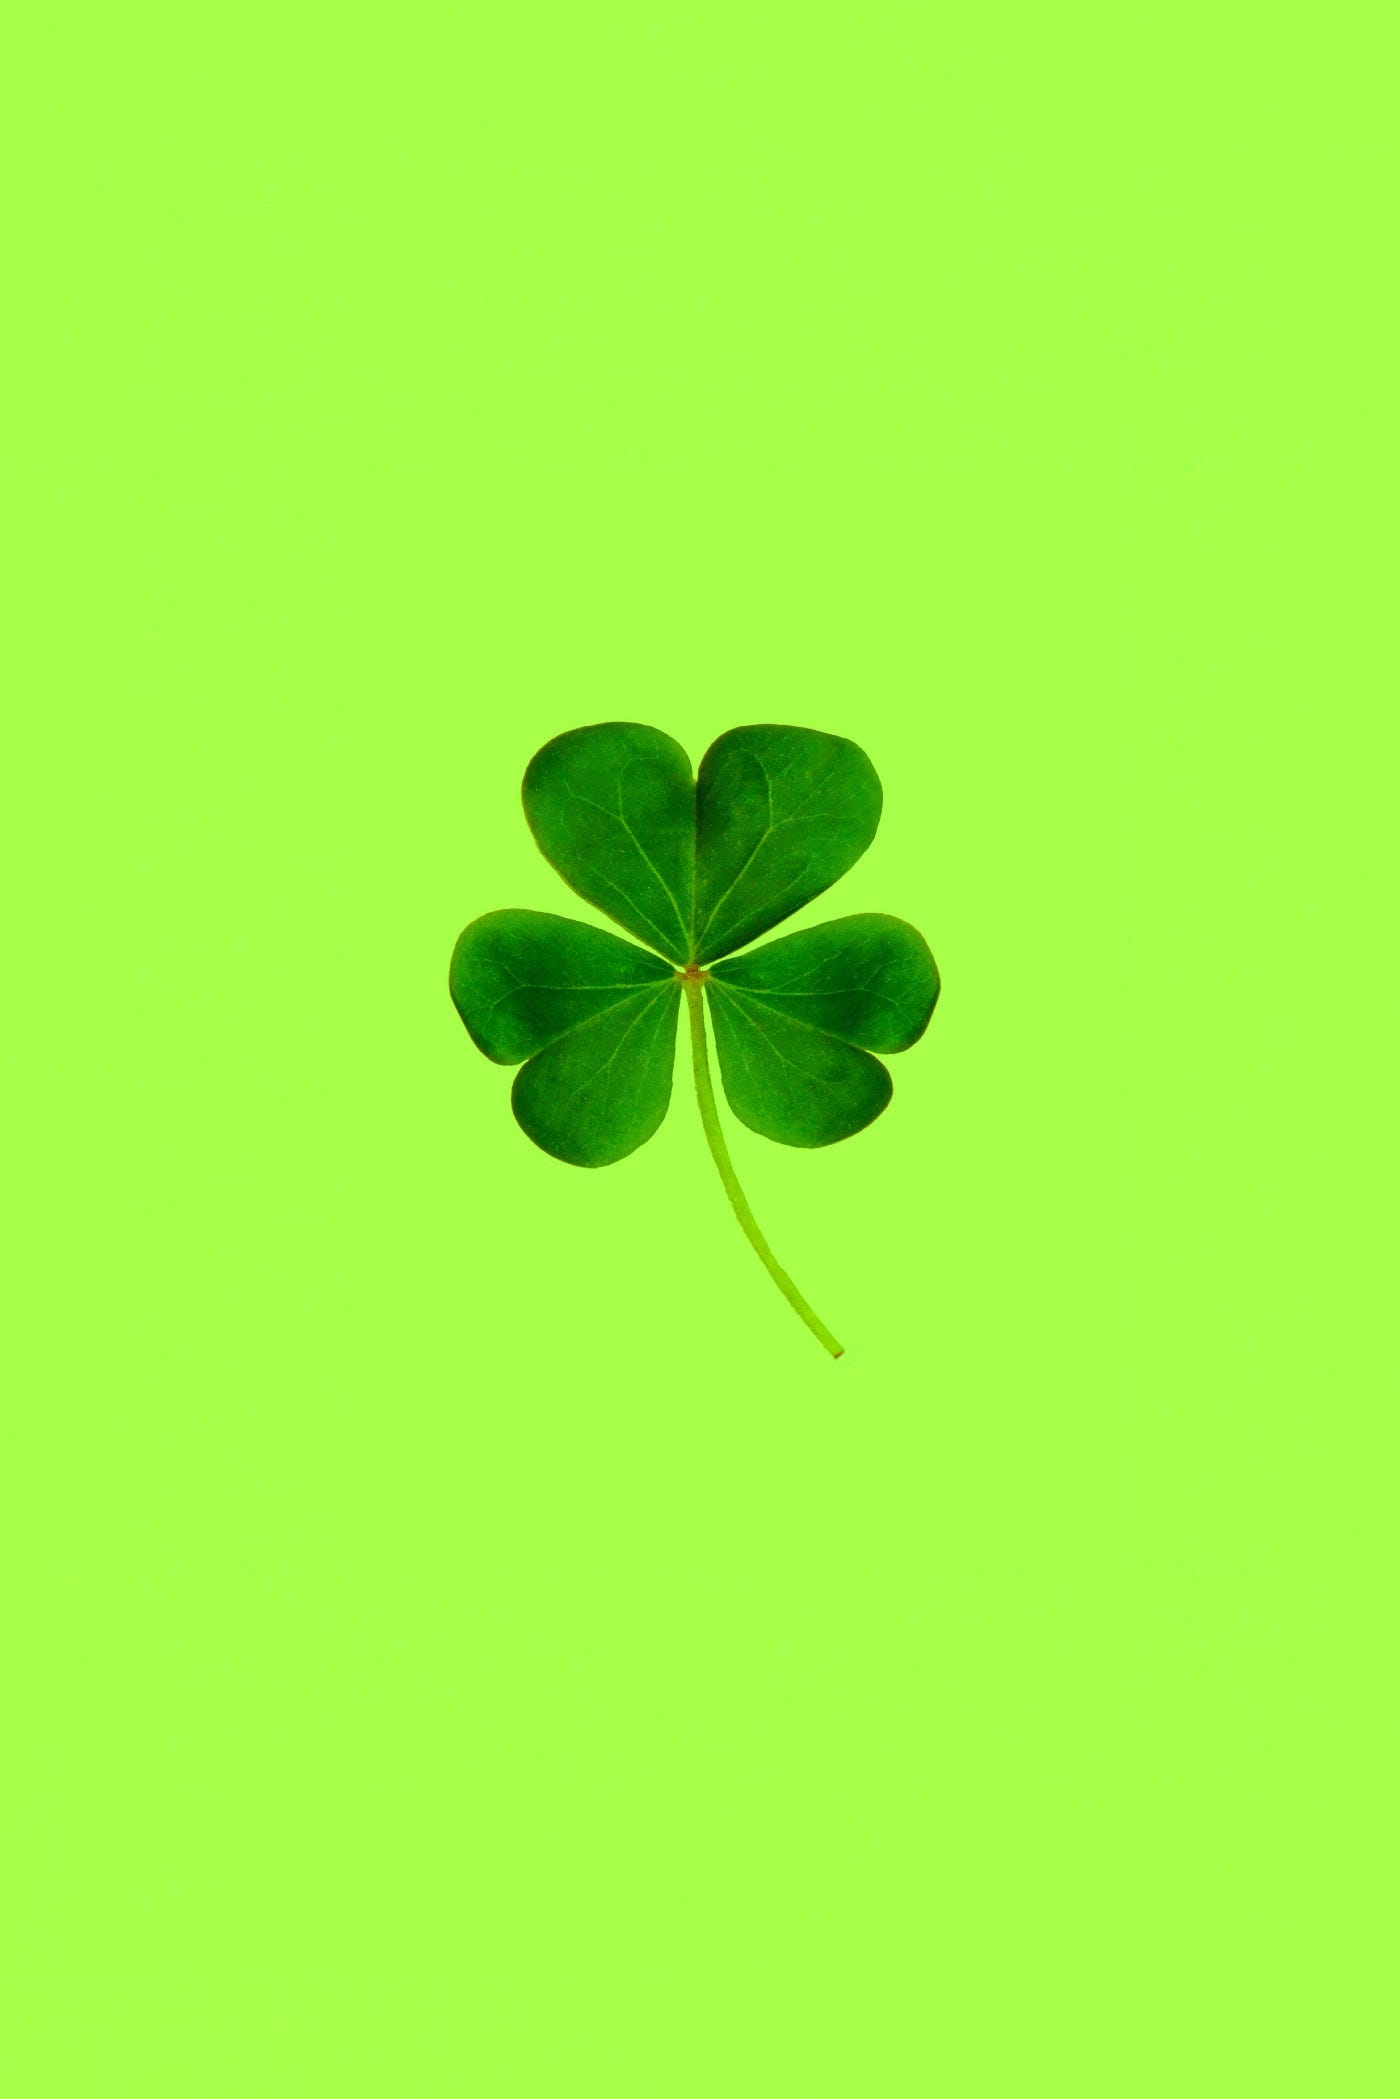 Picture of four leaf clover representing luck